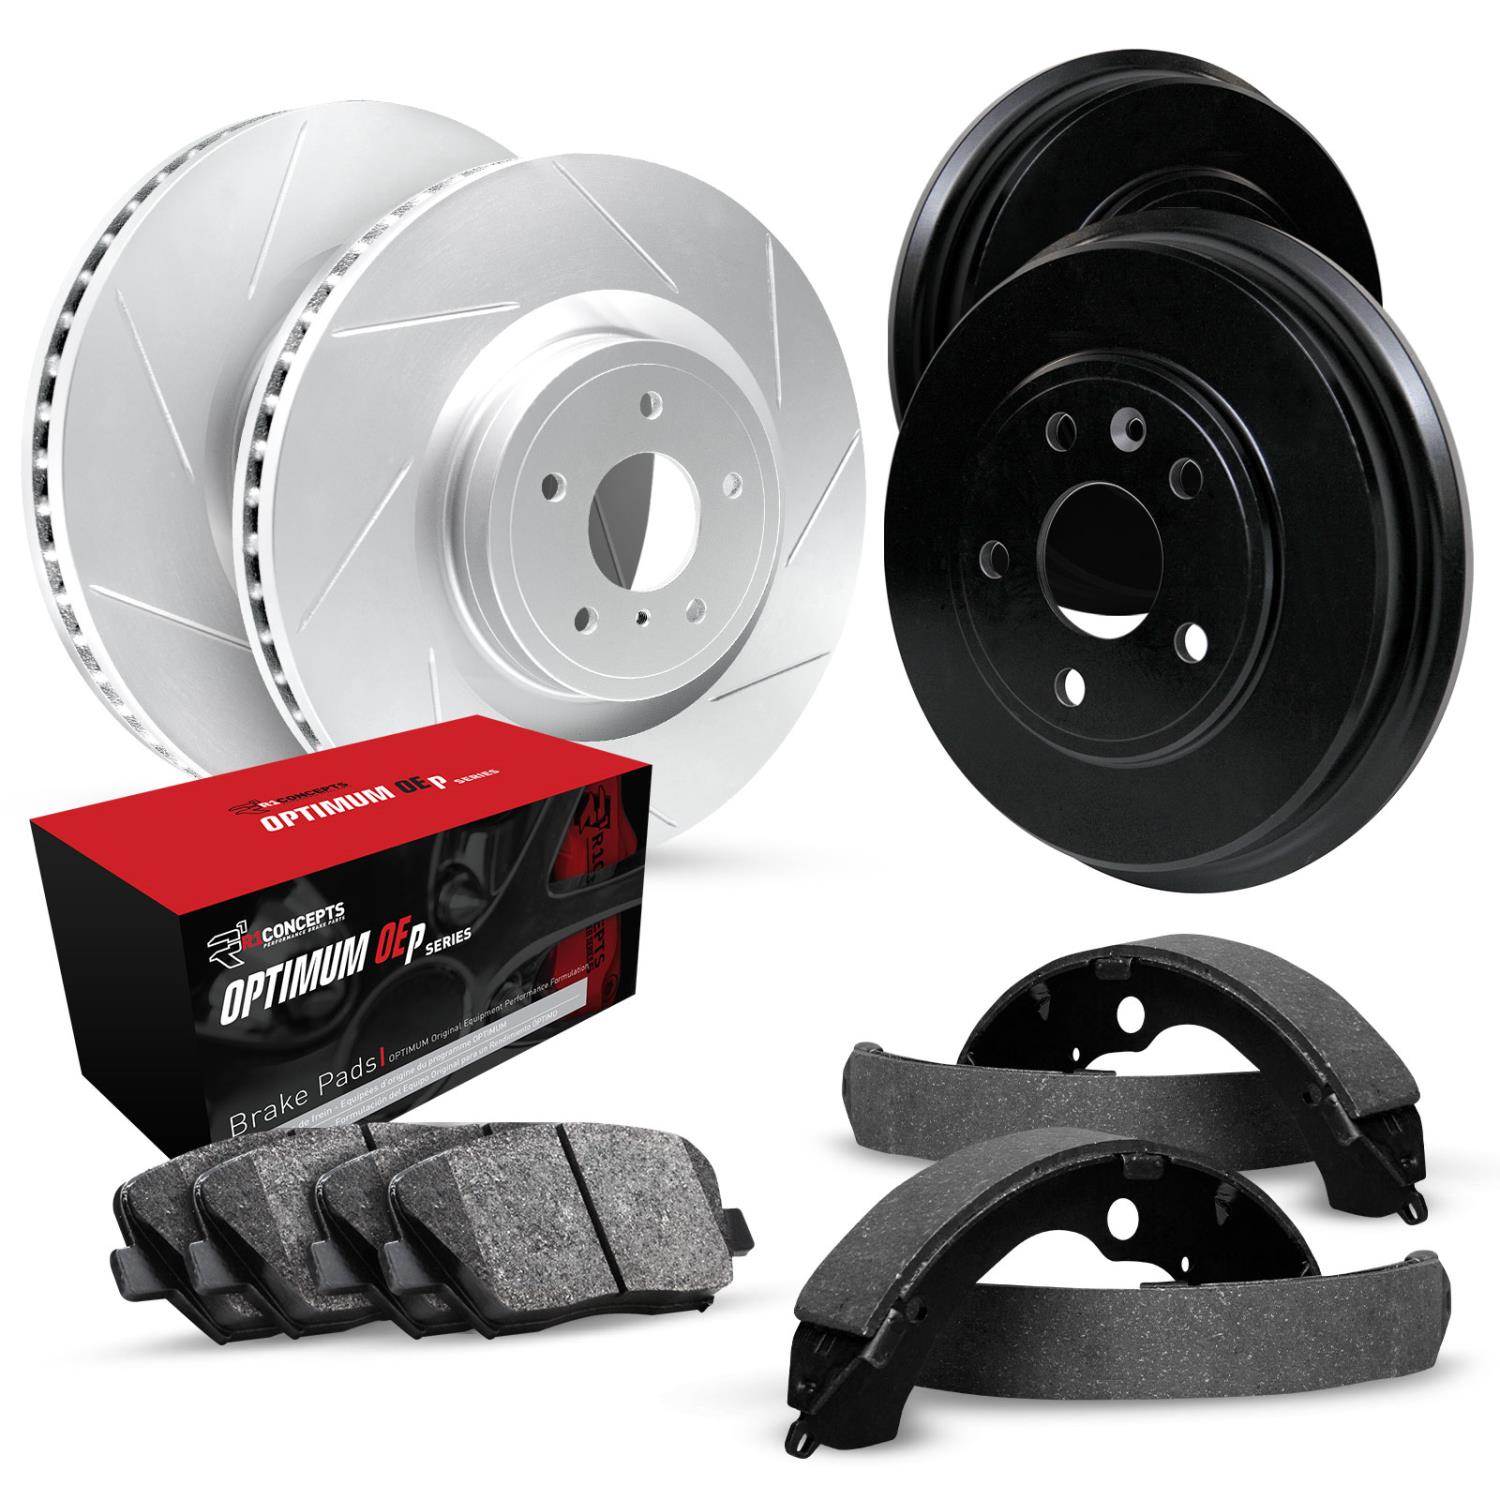 GEO-Carbon Slotted Brake Rotor & Drum Set w/Optimum OE Pads & Shoes, 2004-2006 Lexus/Toyota/Scion, Position: Front & Rear